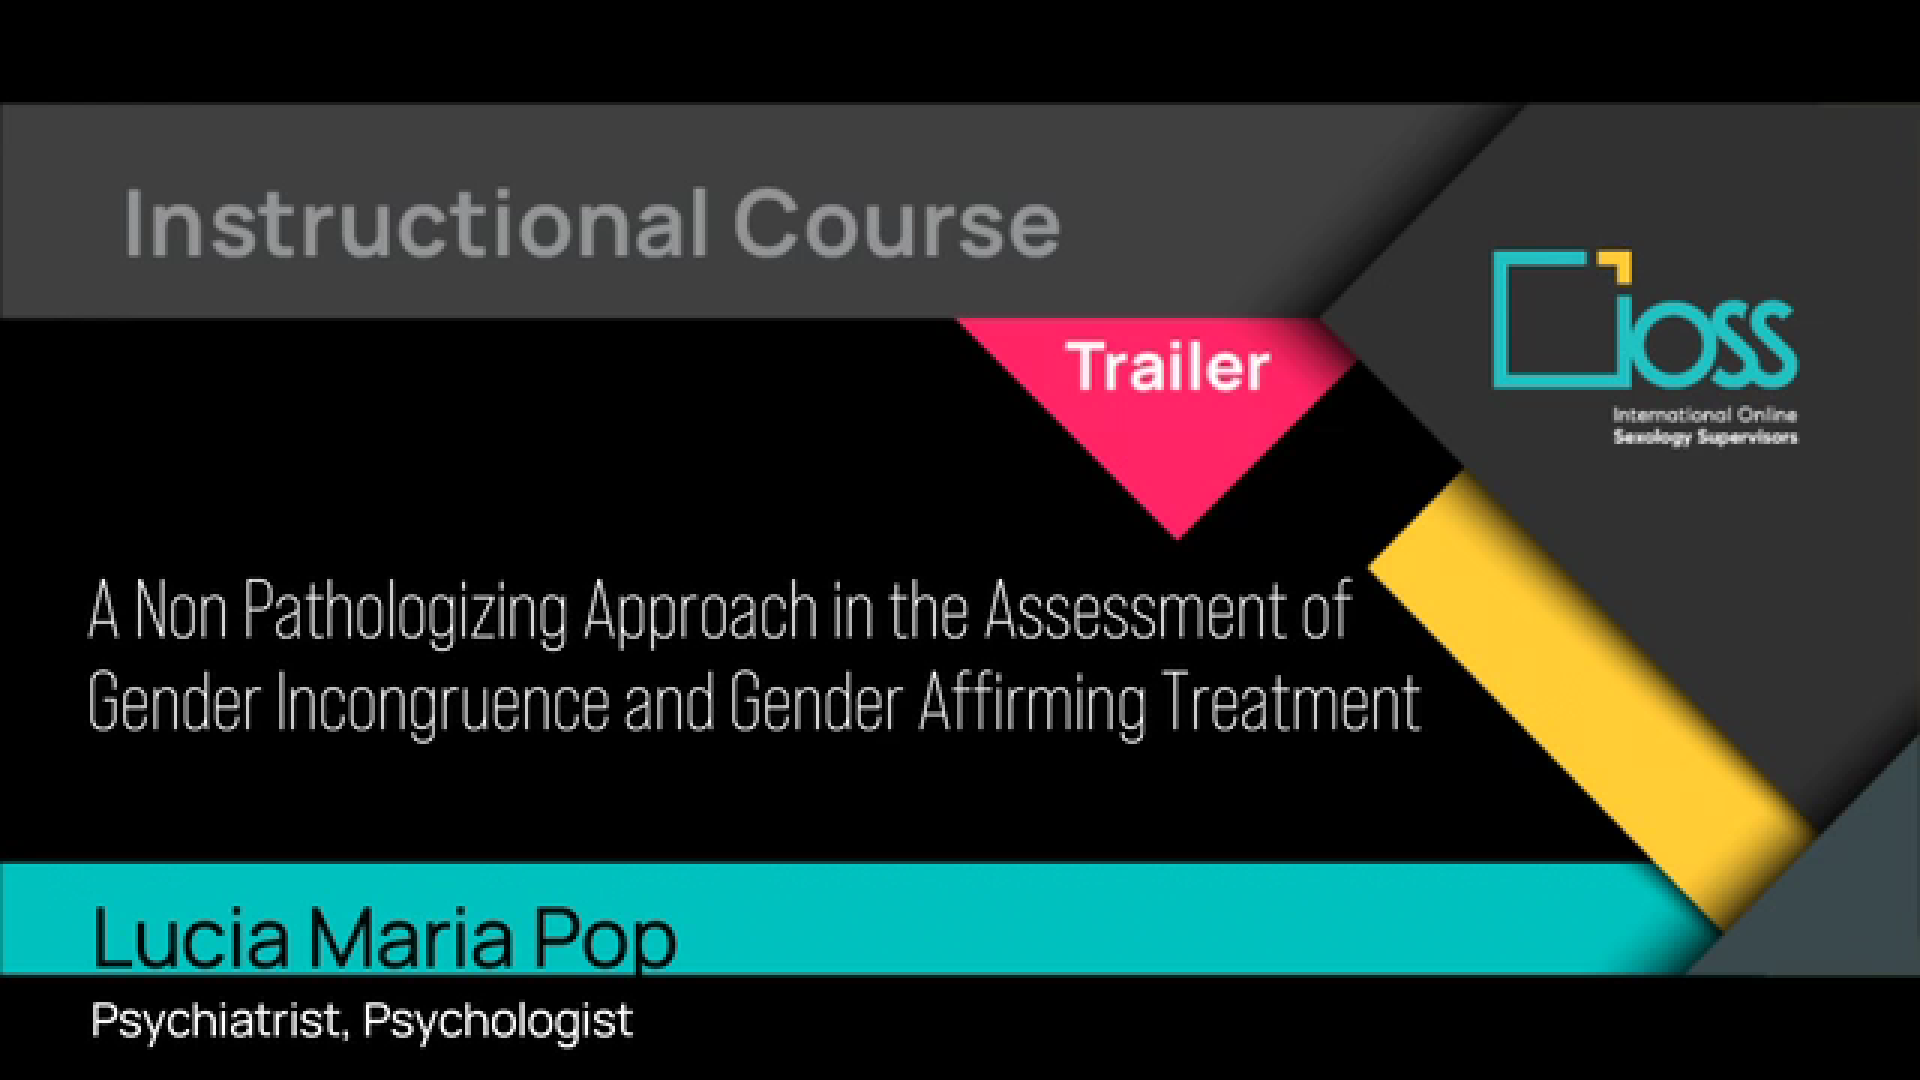 Trailer A non pathologizing approach in the assessment of gender incongruence and gender affirming treatment (Part 1 & 2)